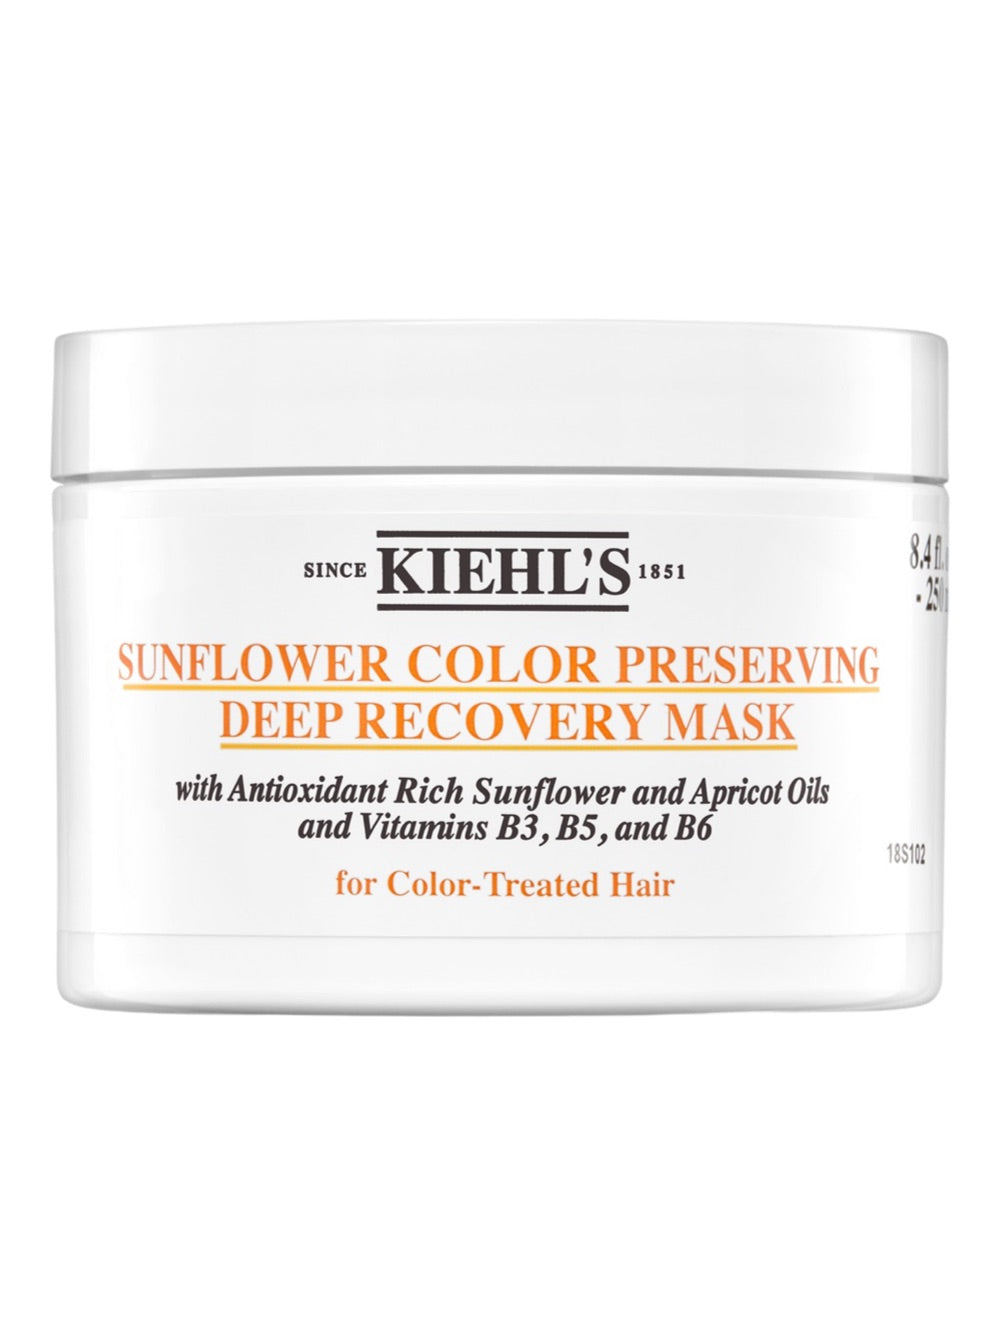 Kiehl's Sunflower Color Preserving Deep Recovery Hair Mask